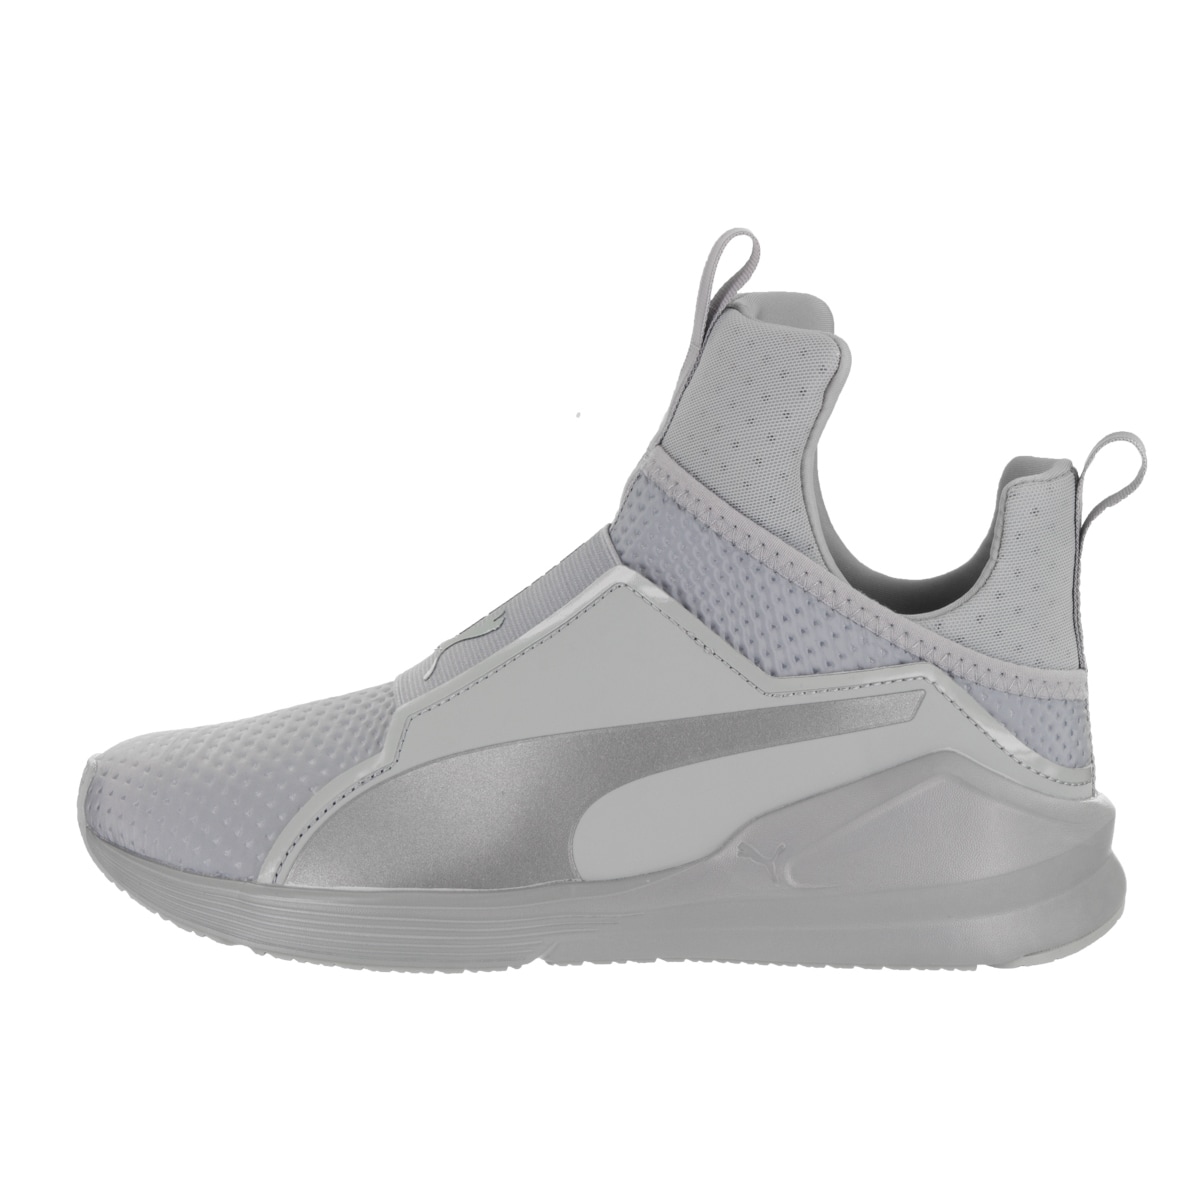 puma fierce quilted women's training shoes